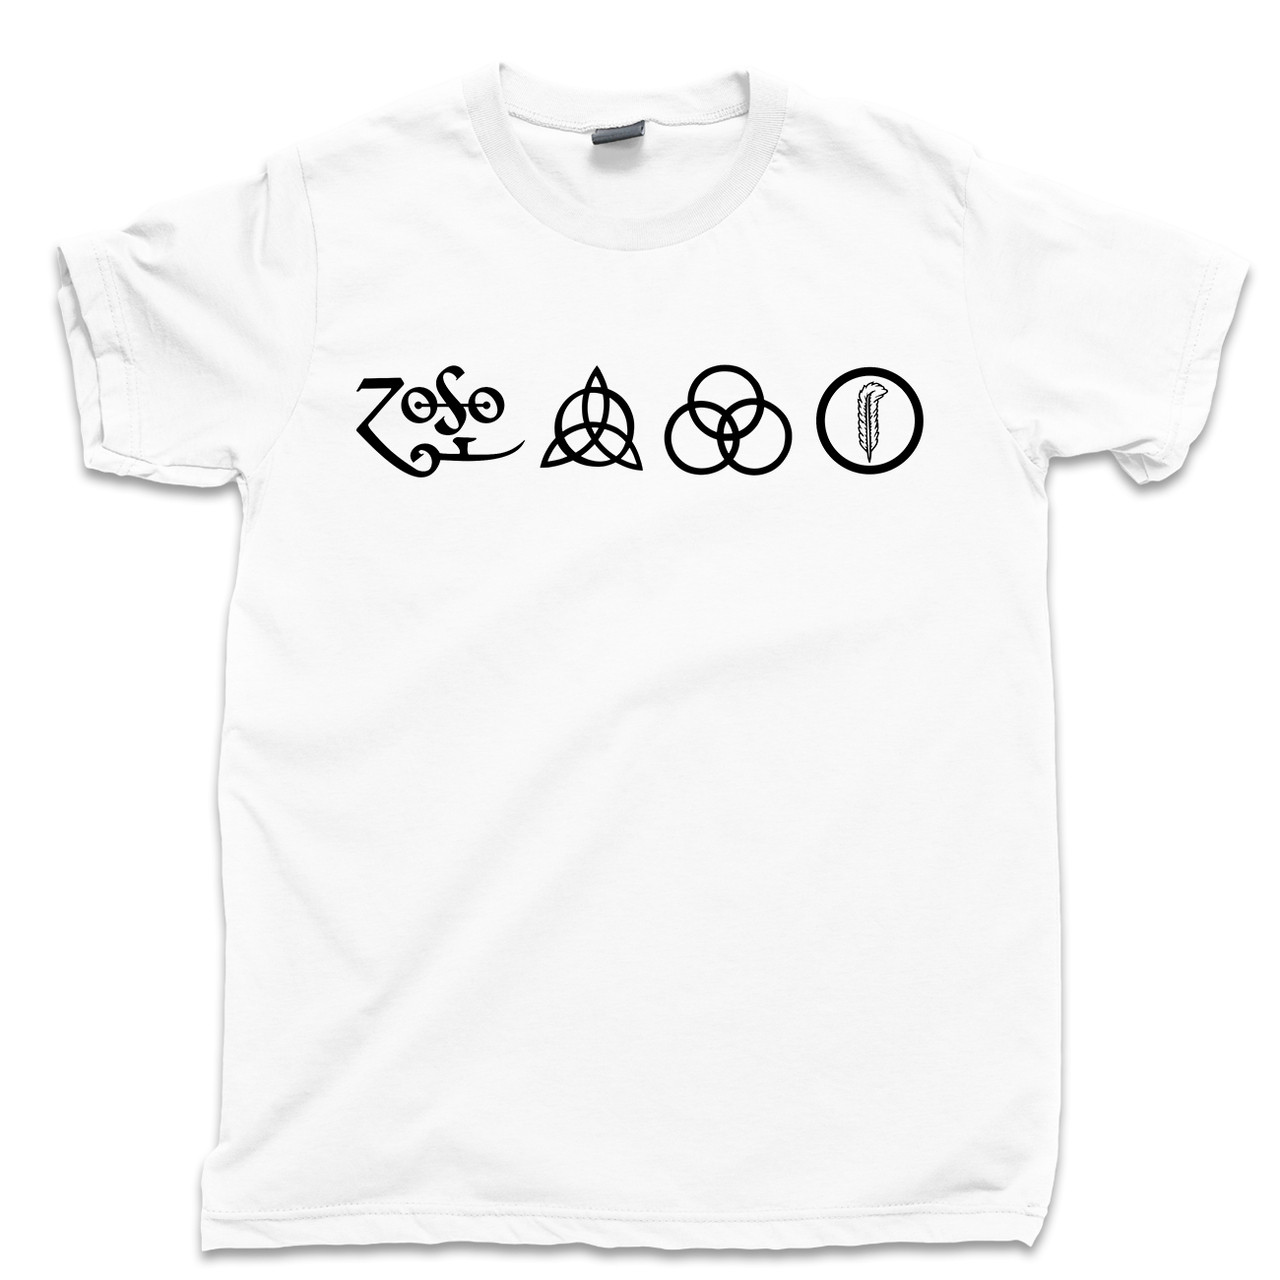 meget fint Skorpe tin Led Zeppelin 4 Symbols T Shirt, Page And Plant, Stairway To Heaven, Zoso Tee